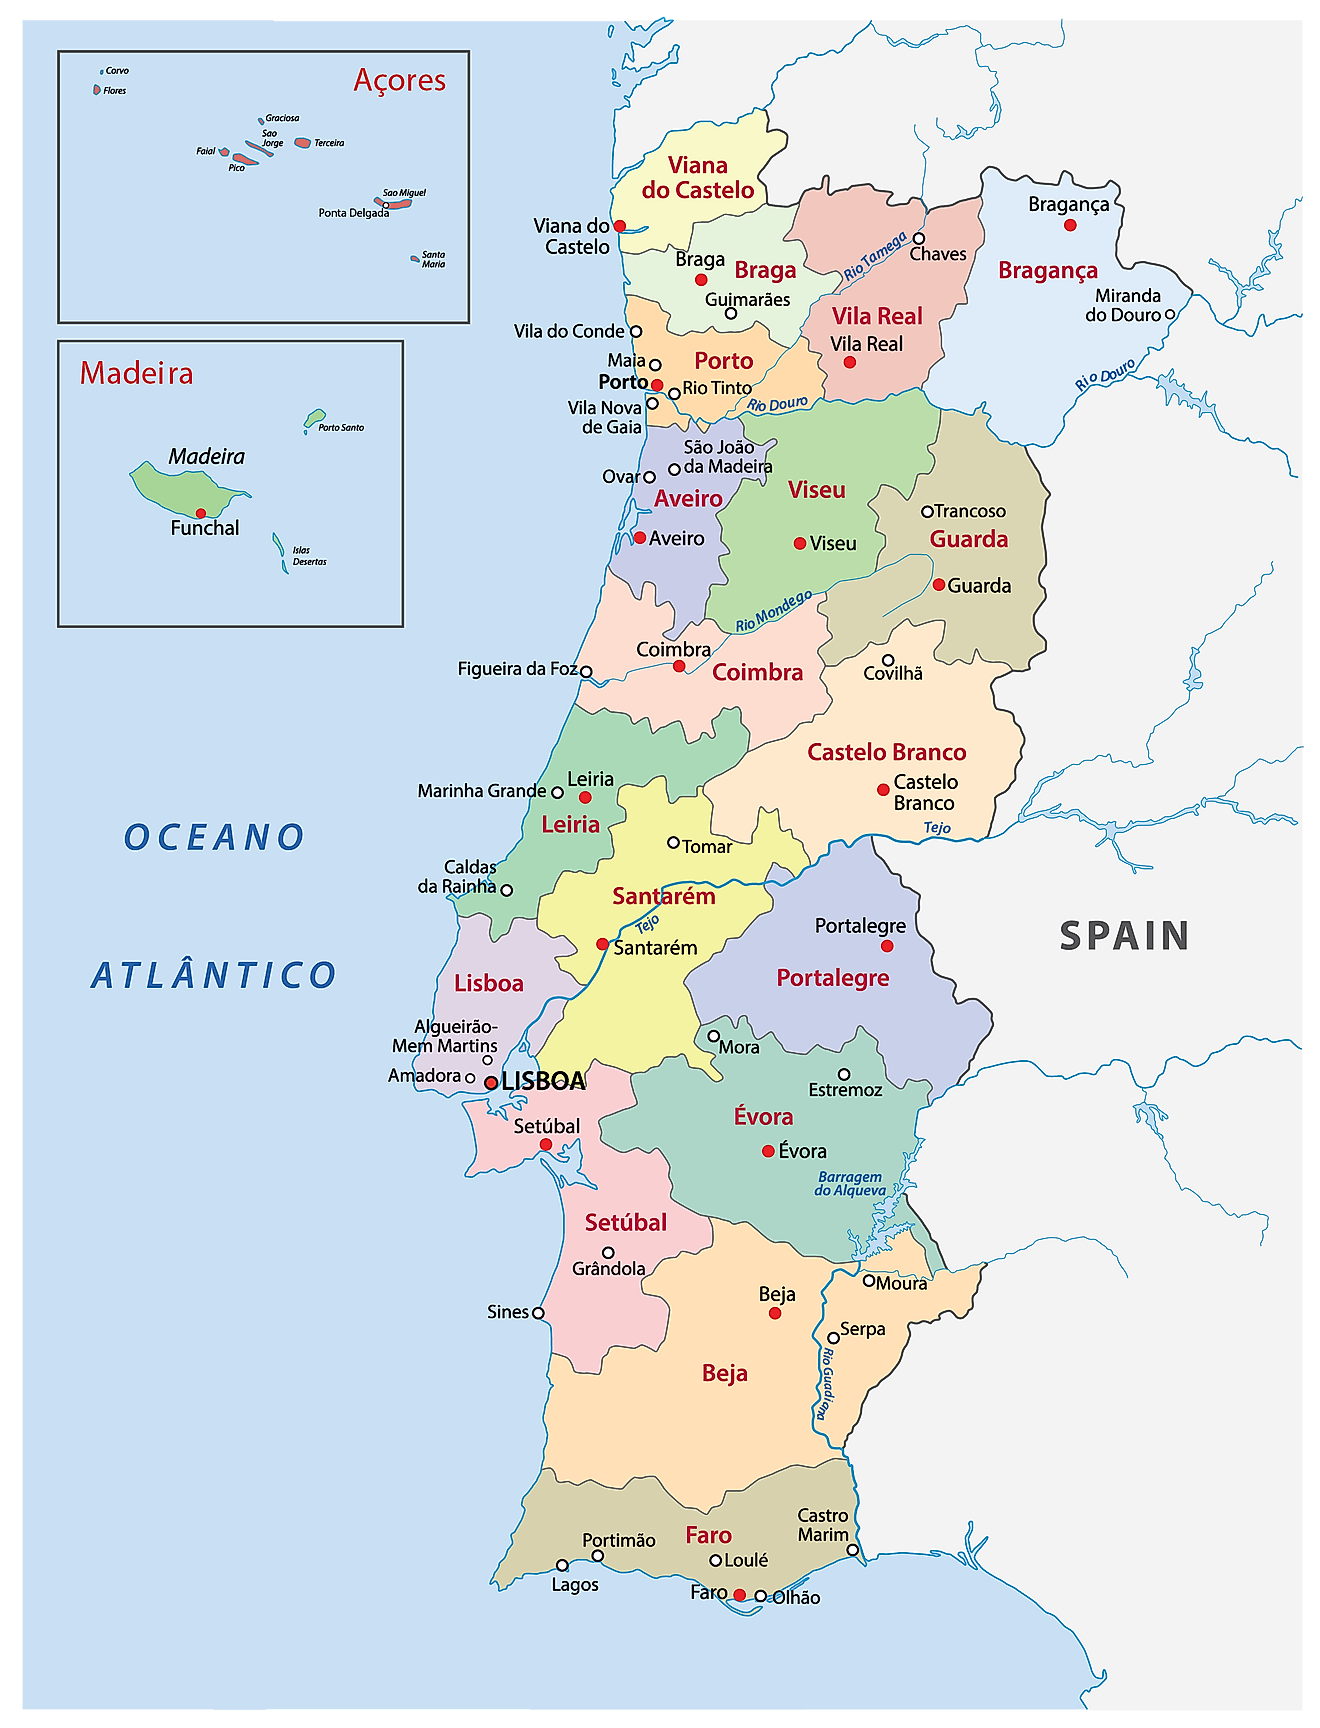 The detailed map of the Portugal with regions or states and cities